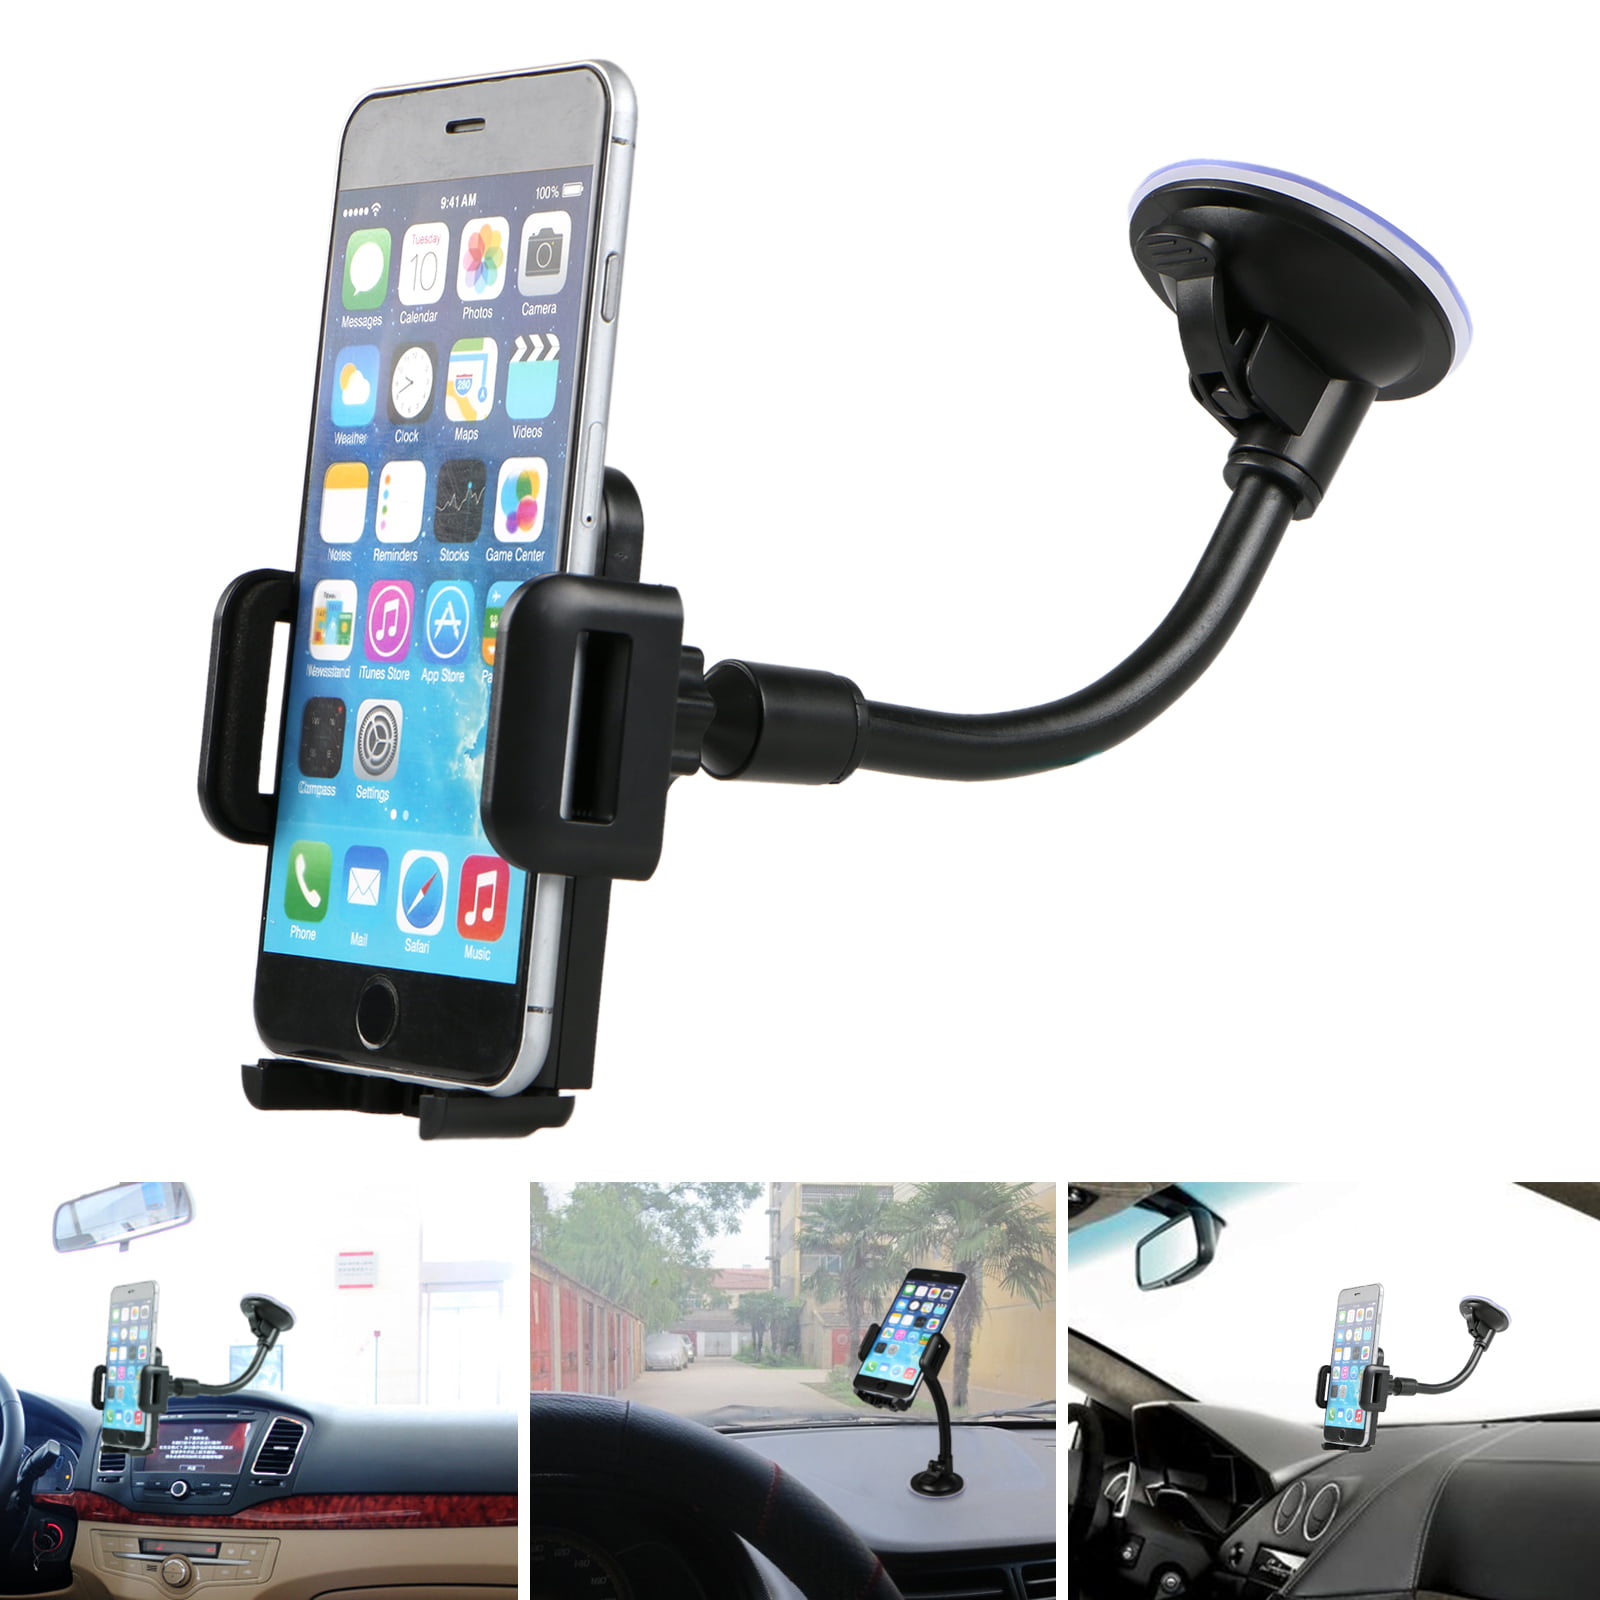 Hands Free Cell Phone Holder HANKEY Universal Car Phone Mount with Long Arm for Dashboard Windshield 2021 Latest Upgraded